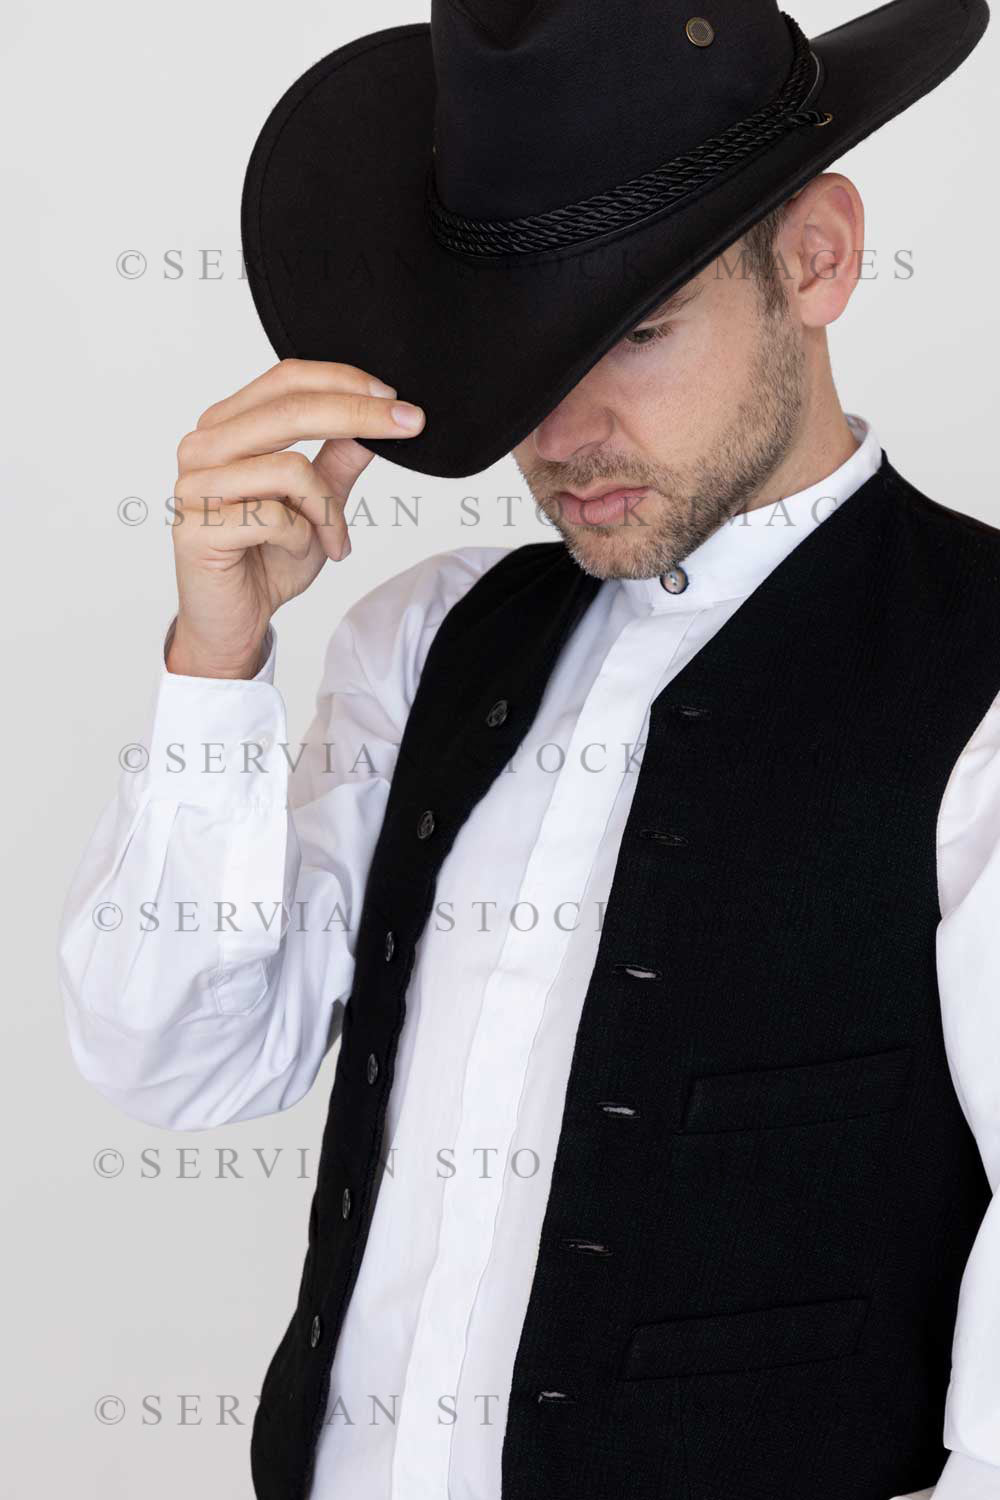 Historical Cowboy against a white backdrop (Andrew 2443)